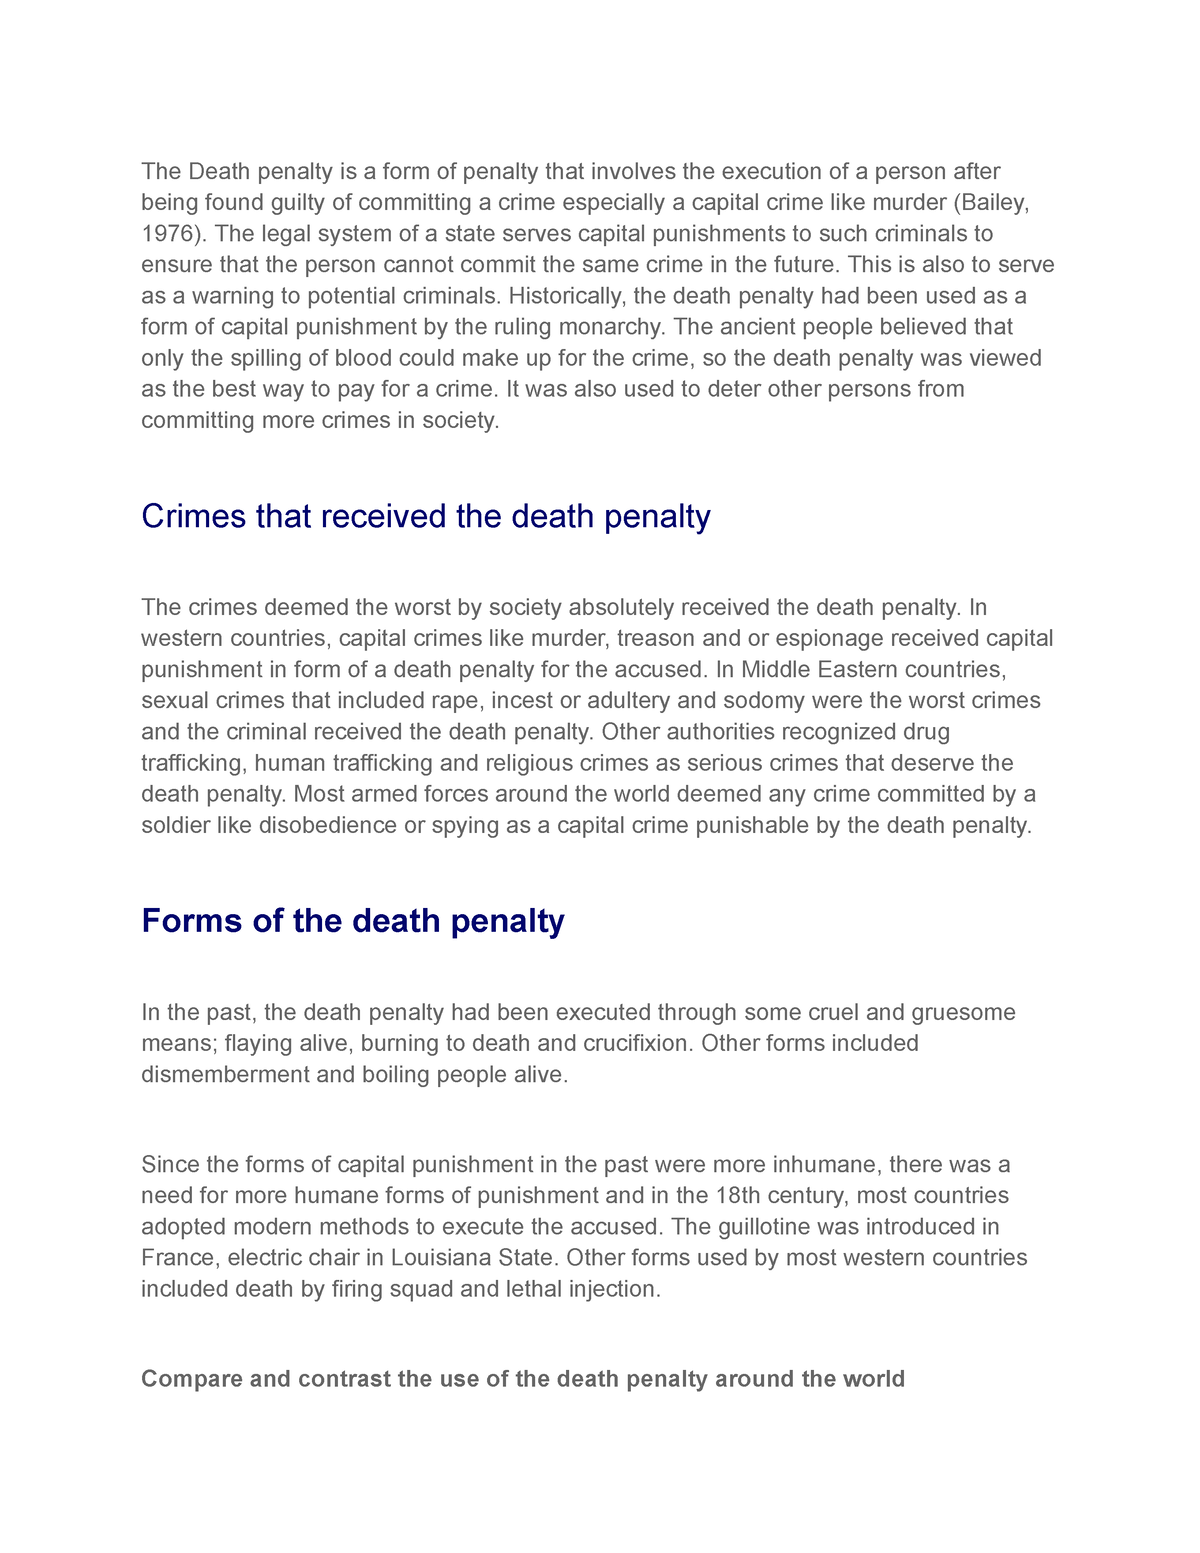 compare and contrast essay death penalty